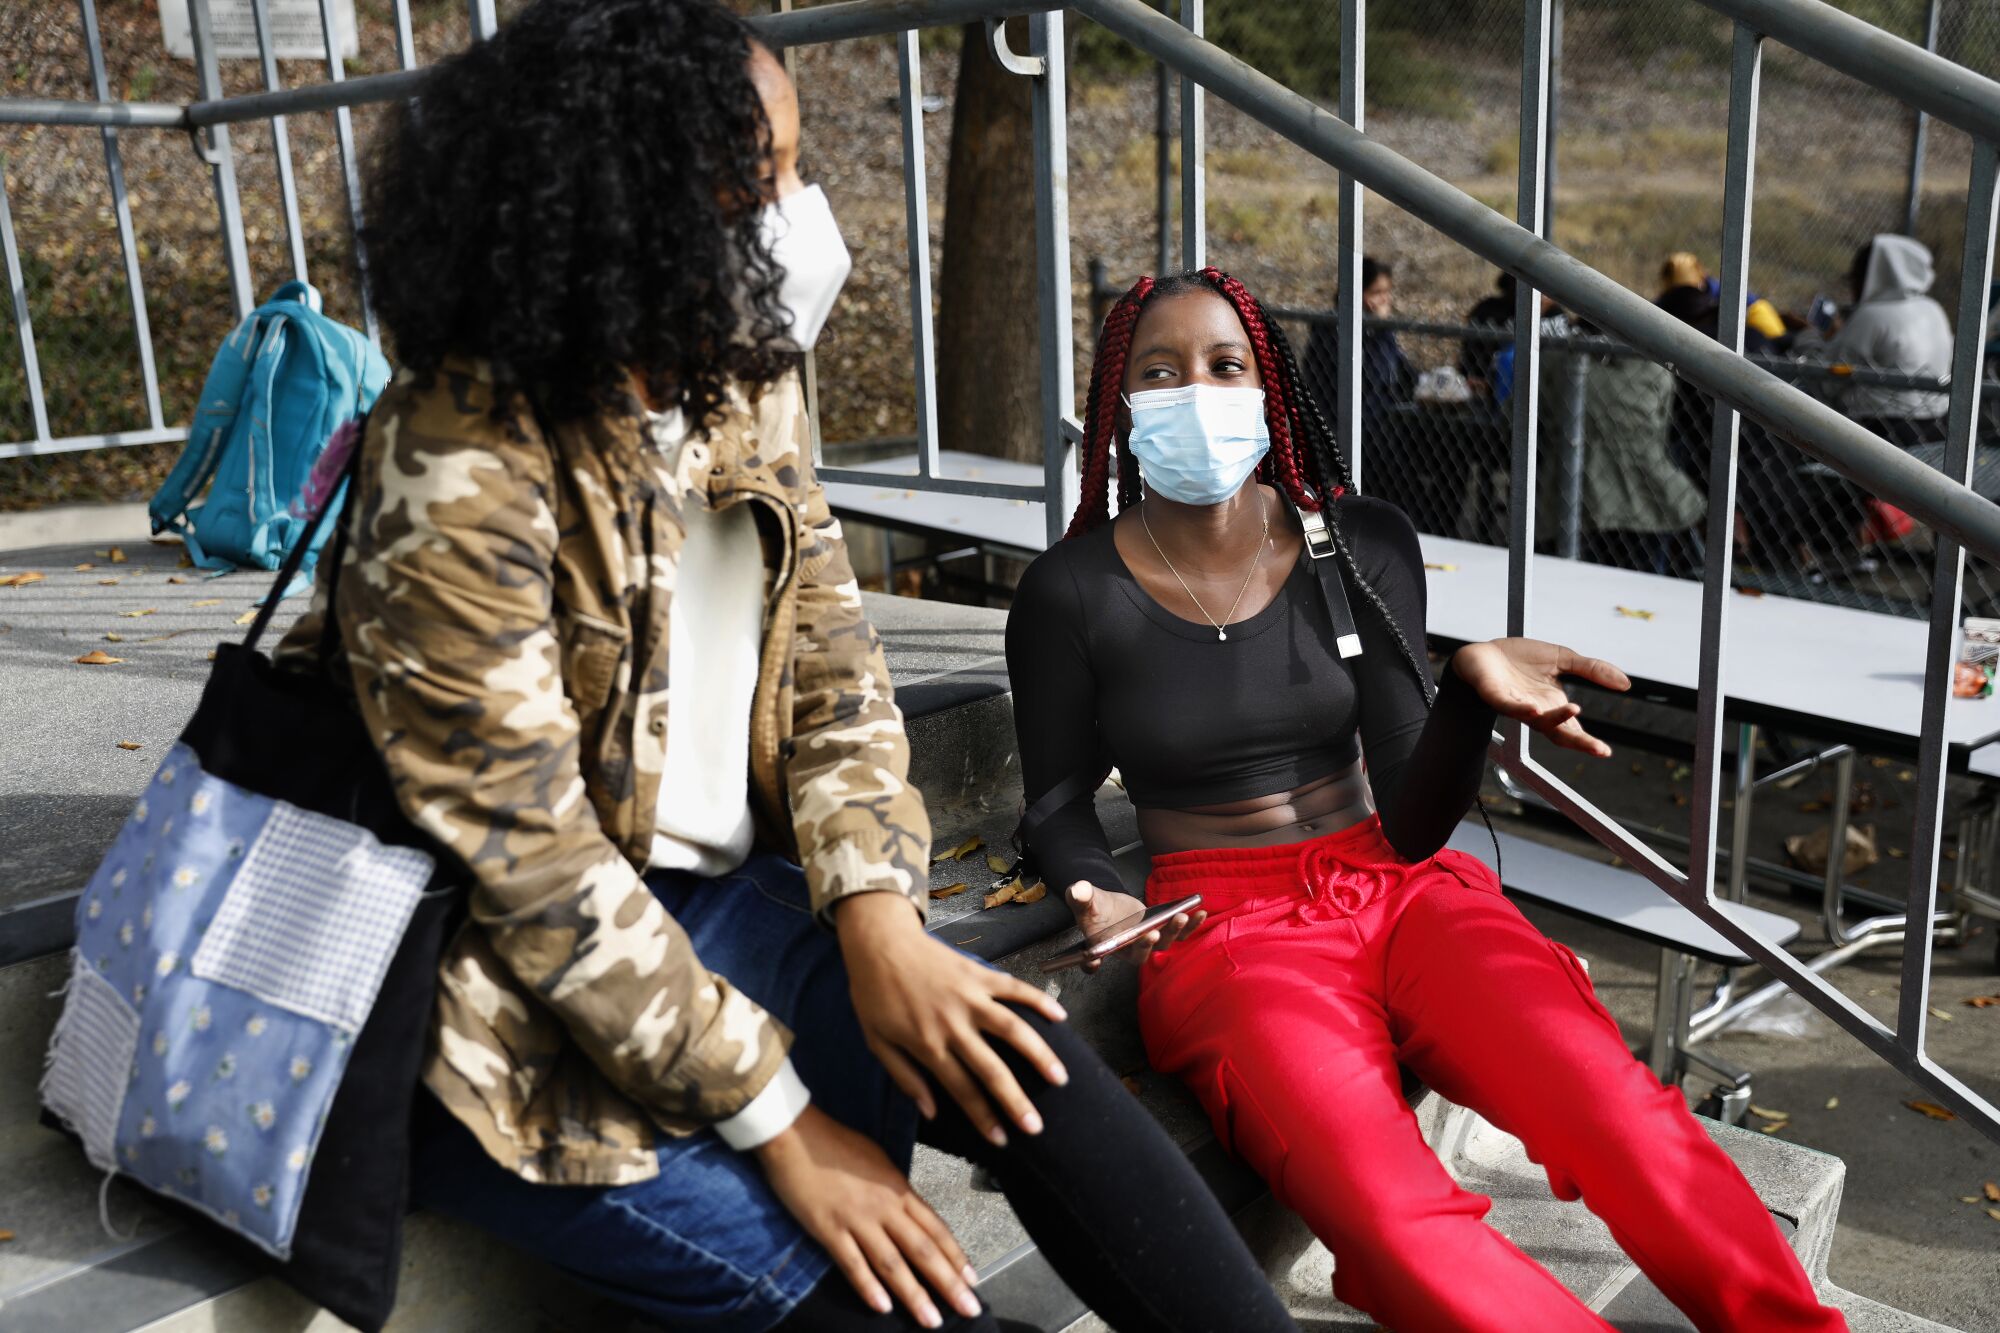 Aleyia Willis, 17, right, hangs out with her friend Kaila London, 17, at Downtown Magnets High School.